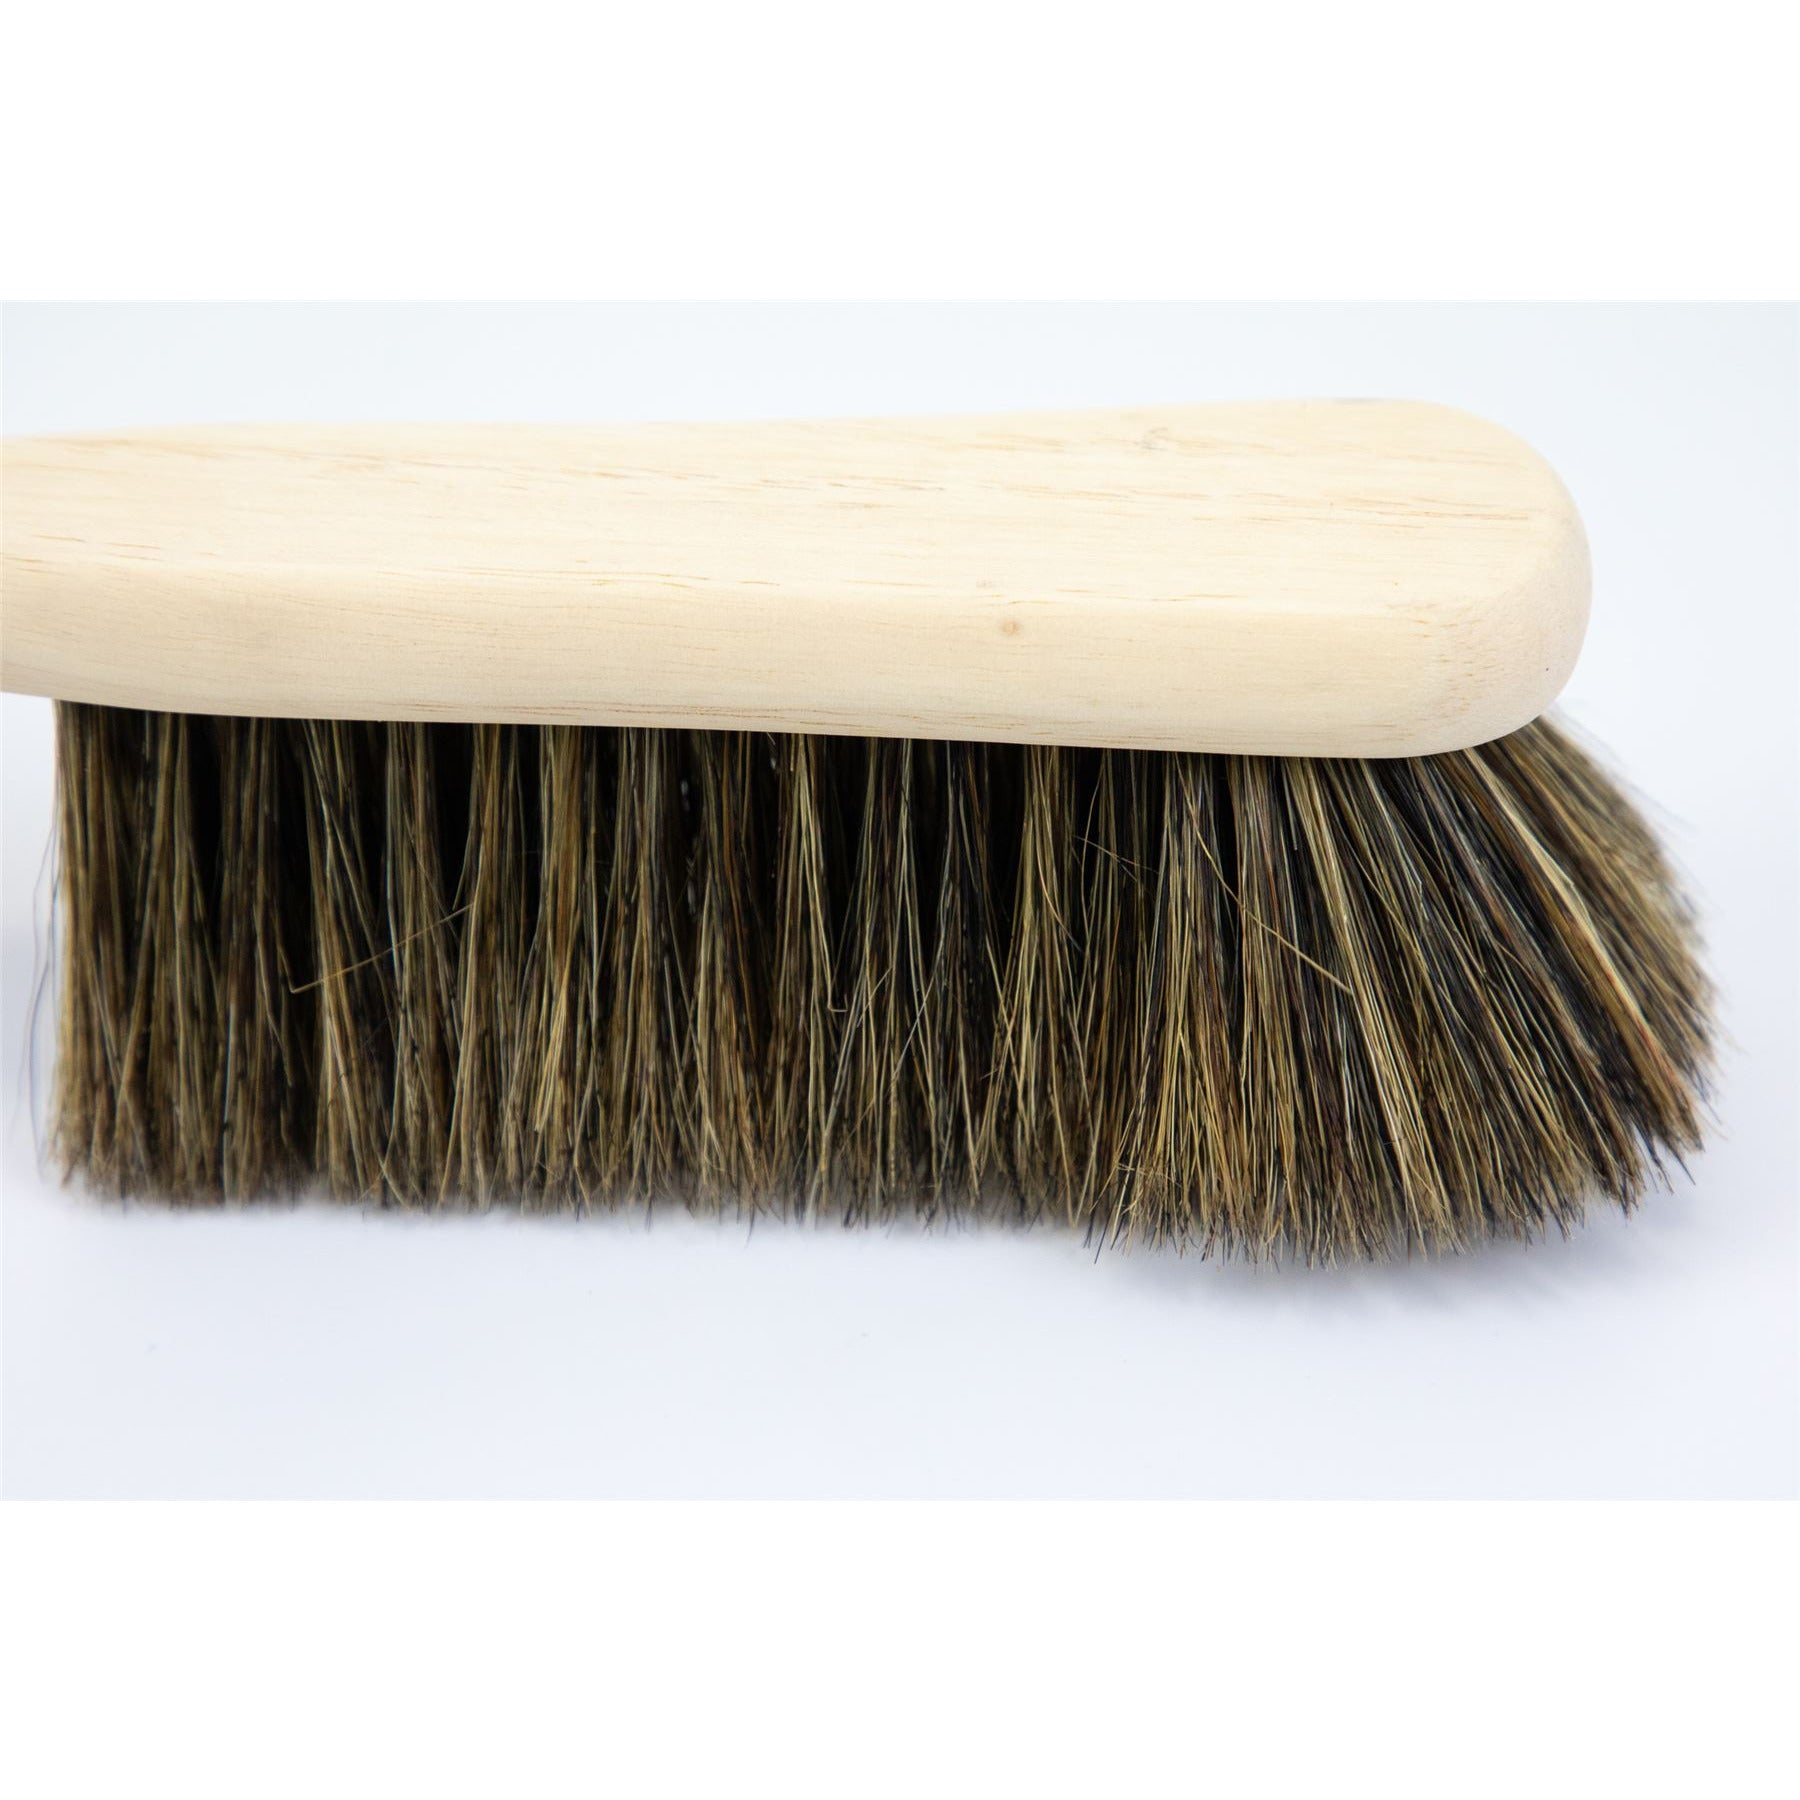 Unvarnished Plain Pure Natural Real Bristle Hair Soft Banister Hand Brush - The Dustpan and Brush Store